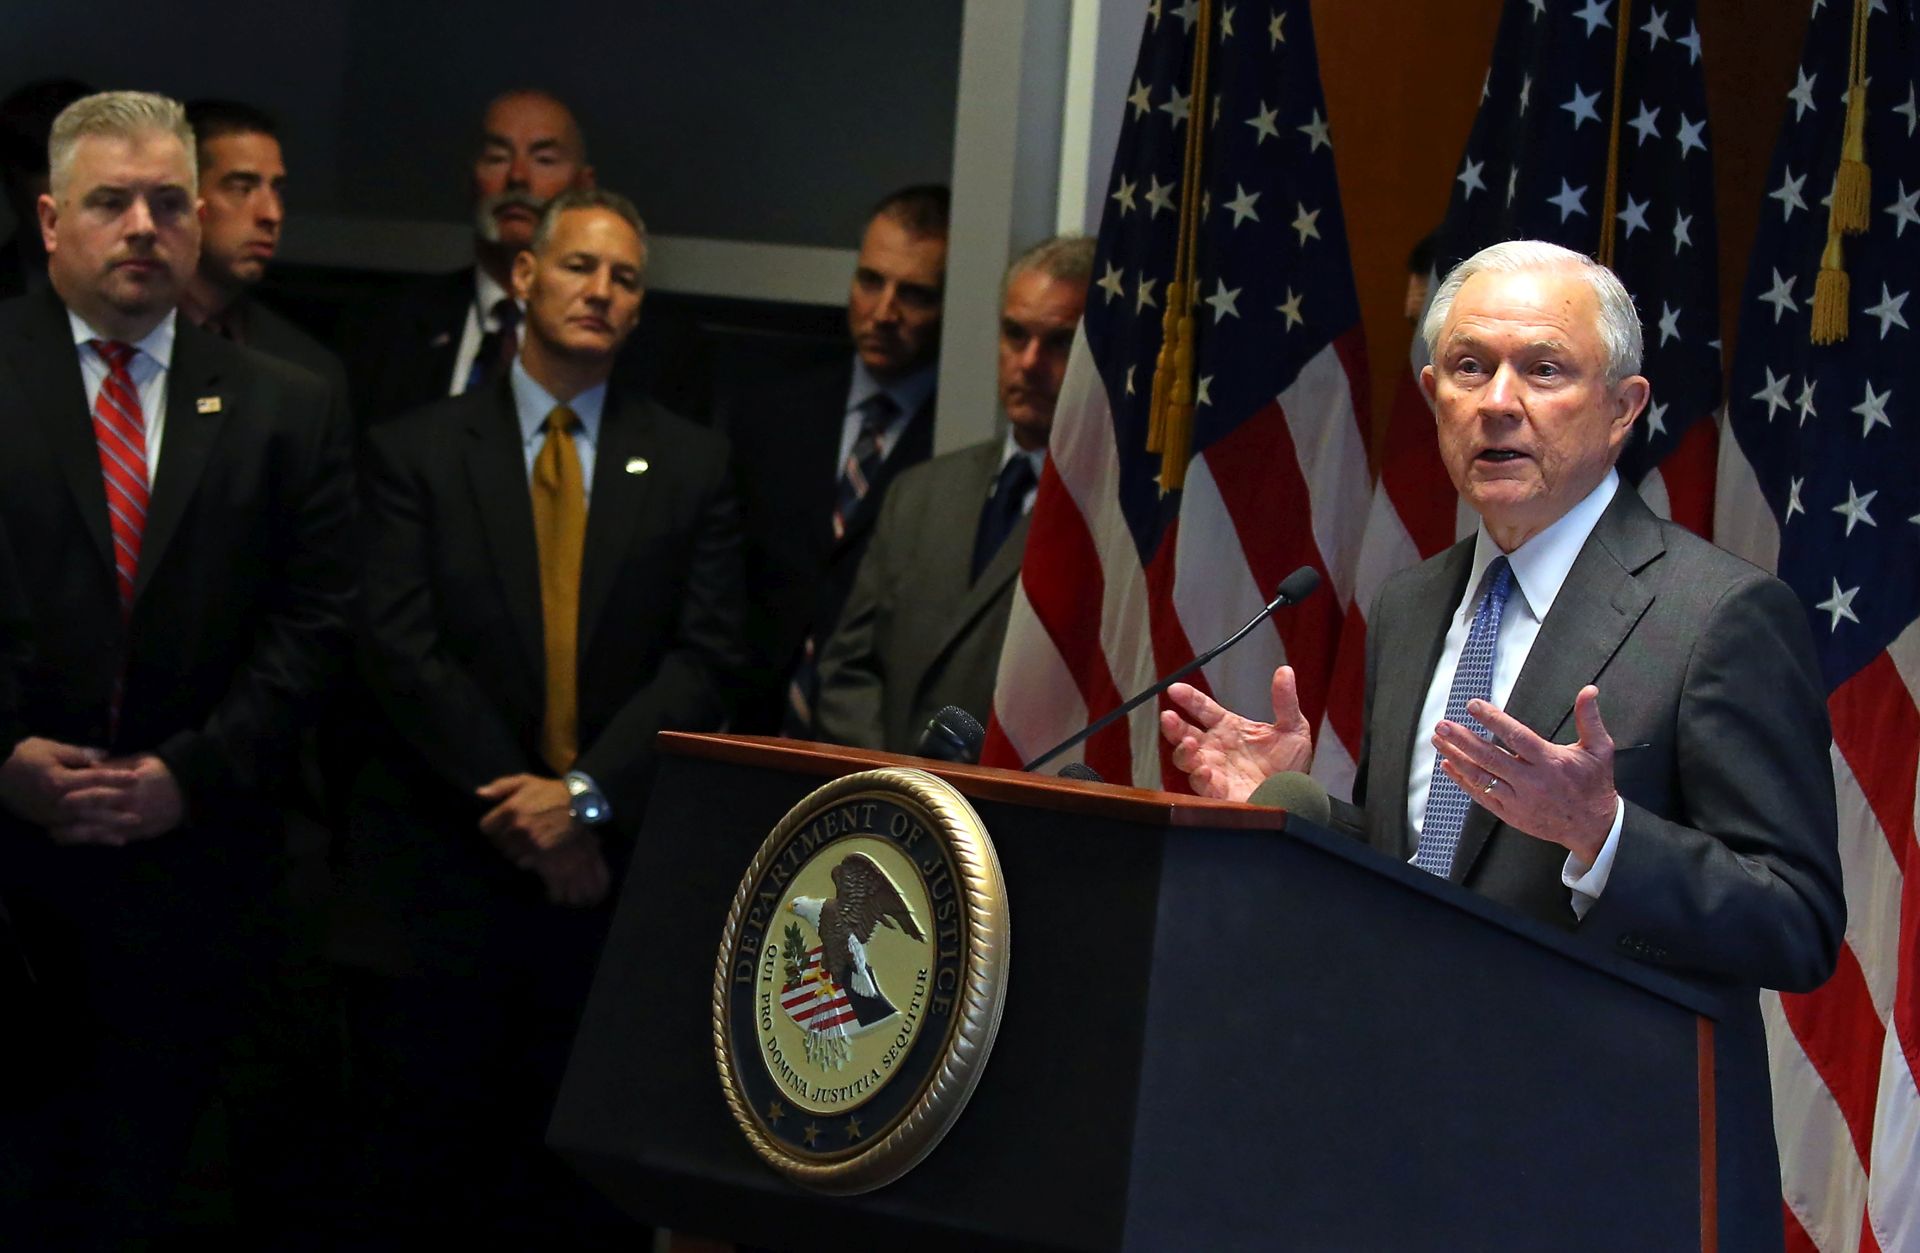 epa05933201 US Attorney General Jeff Sessions speaks at the federal courthouse in Central Islip, New York, USA, 28 April 2017. His speech was focused on gang violence and prosecution for illegal immigration by federal and local authorities.